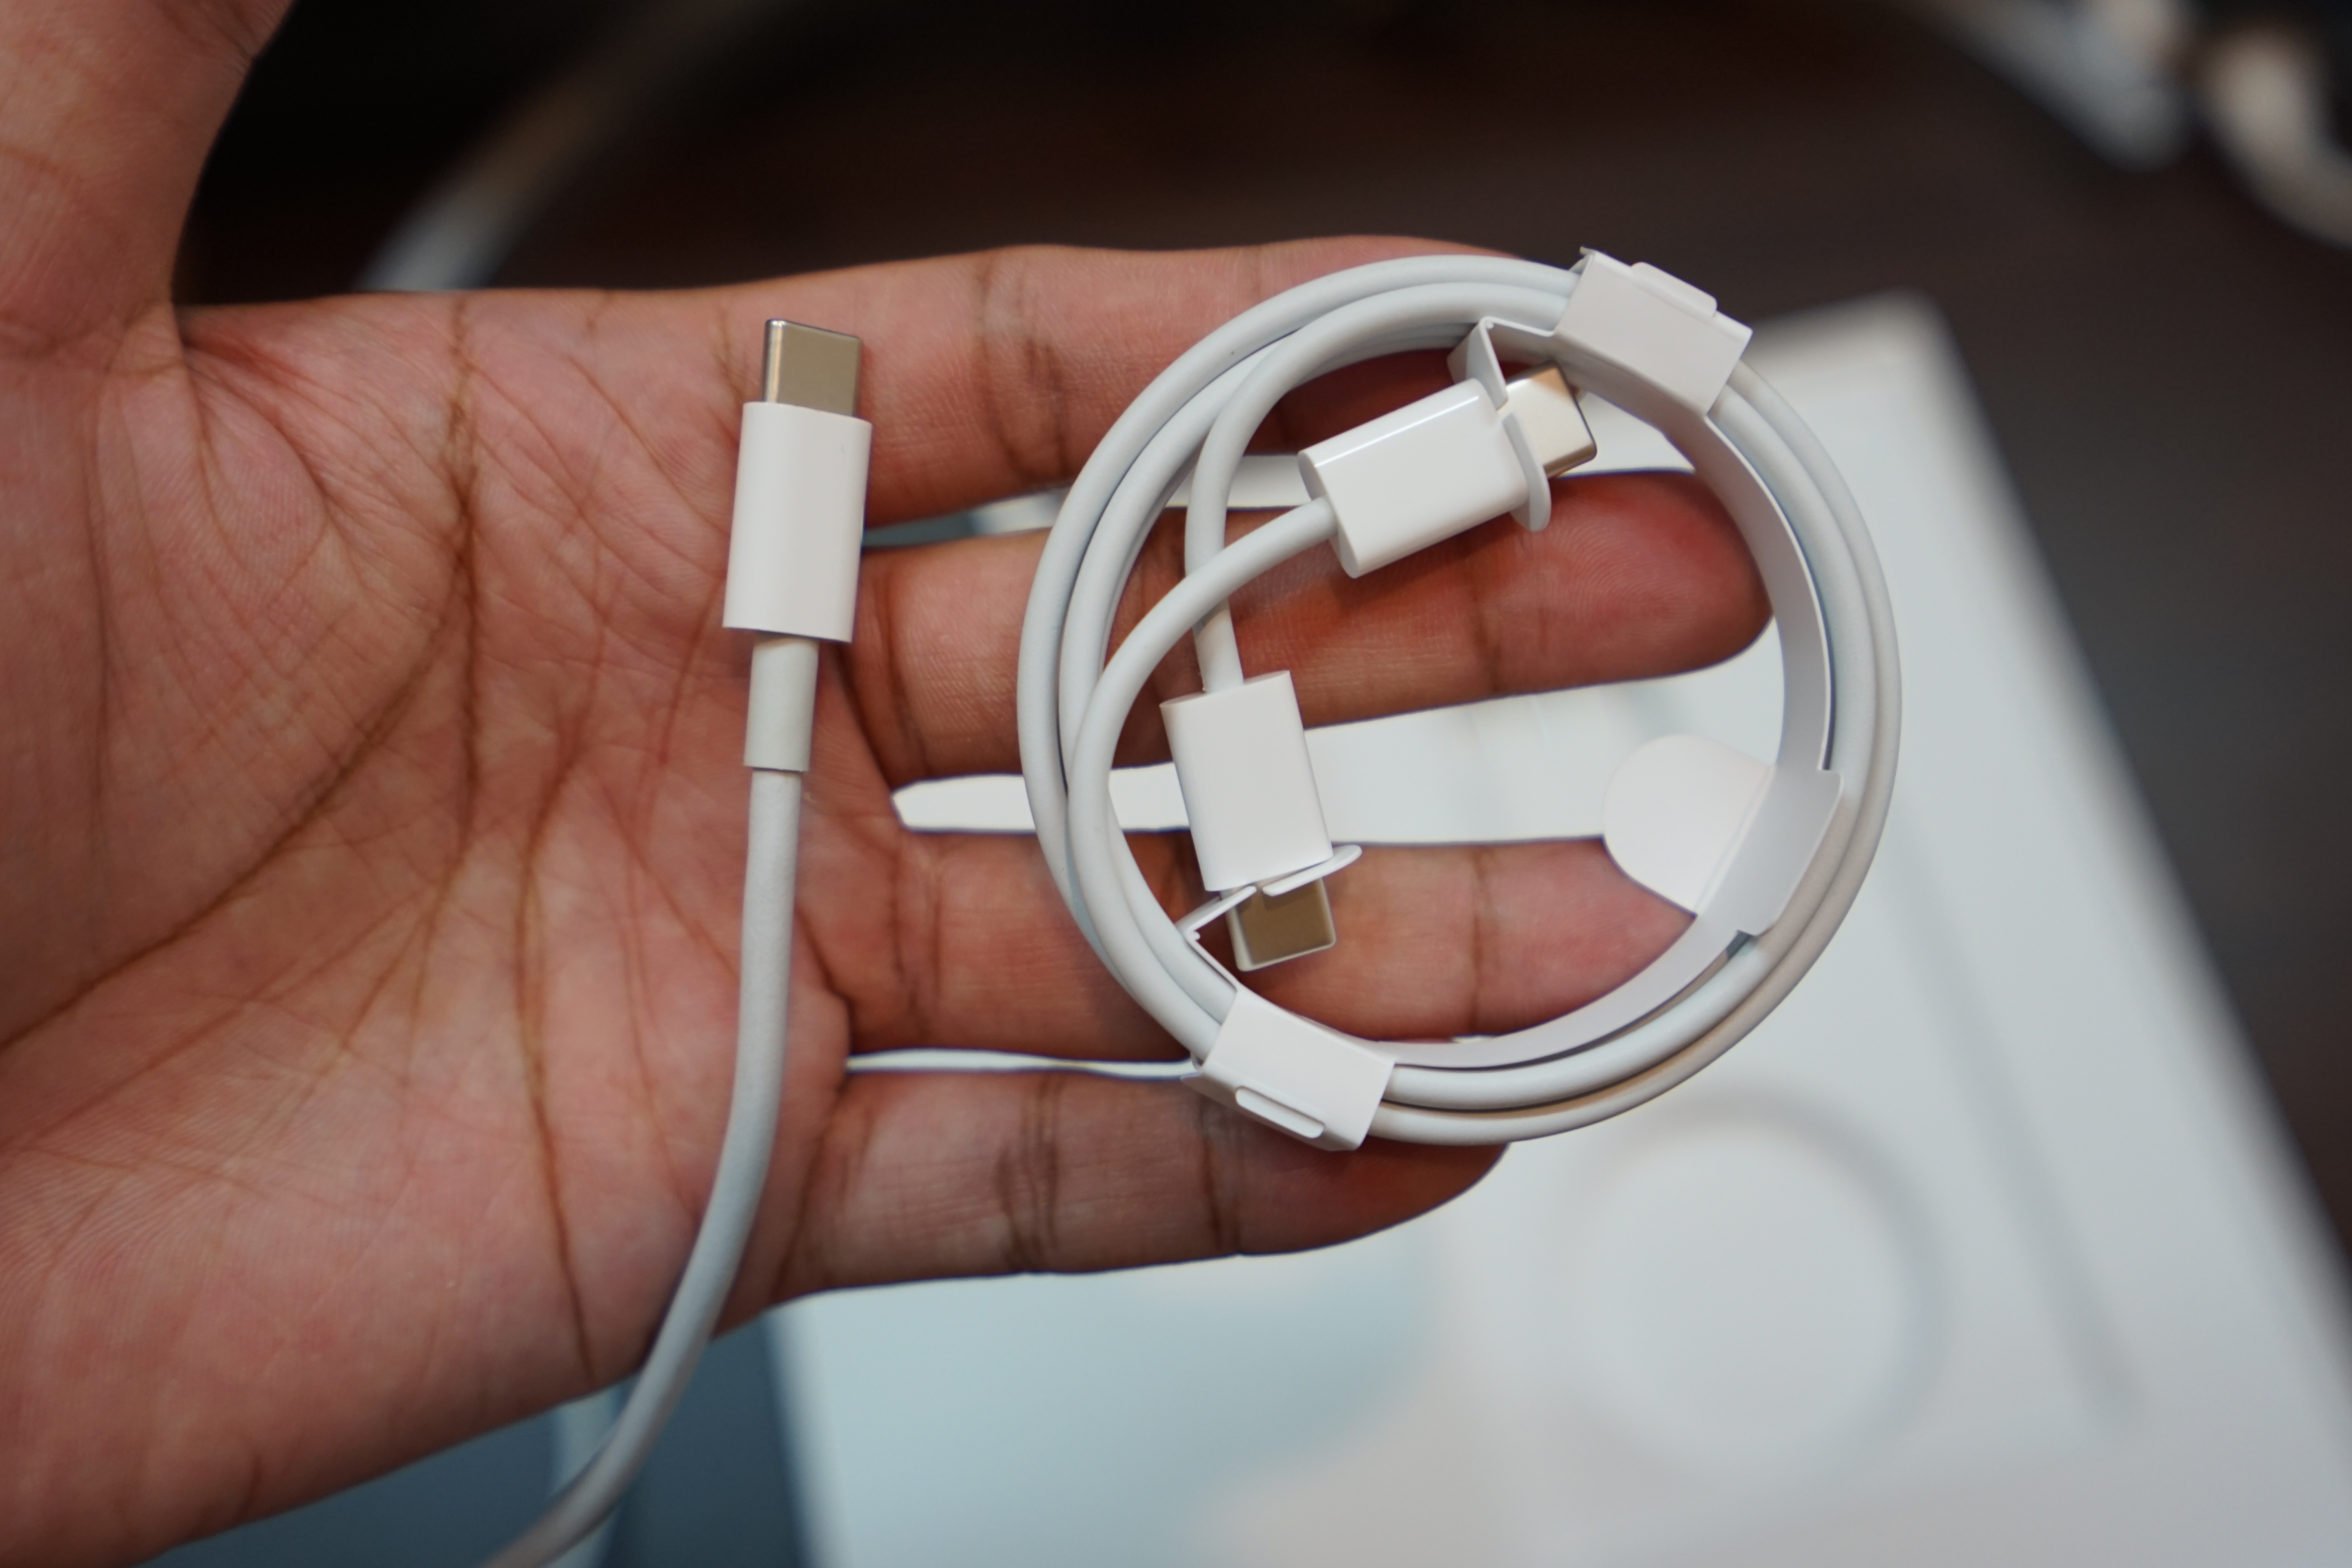 Compare Apple USB-C to USB-C Cable from iPad Pro 11-inch and MacBook Pro